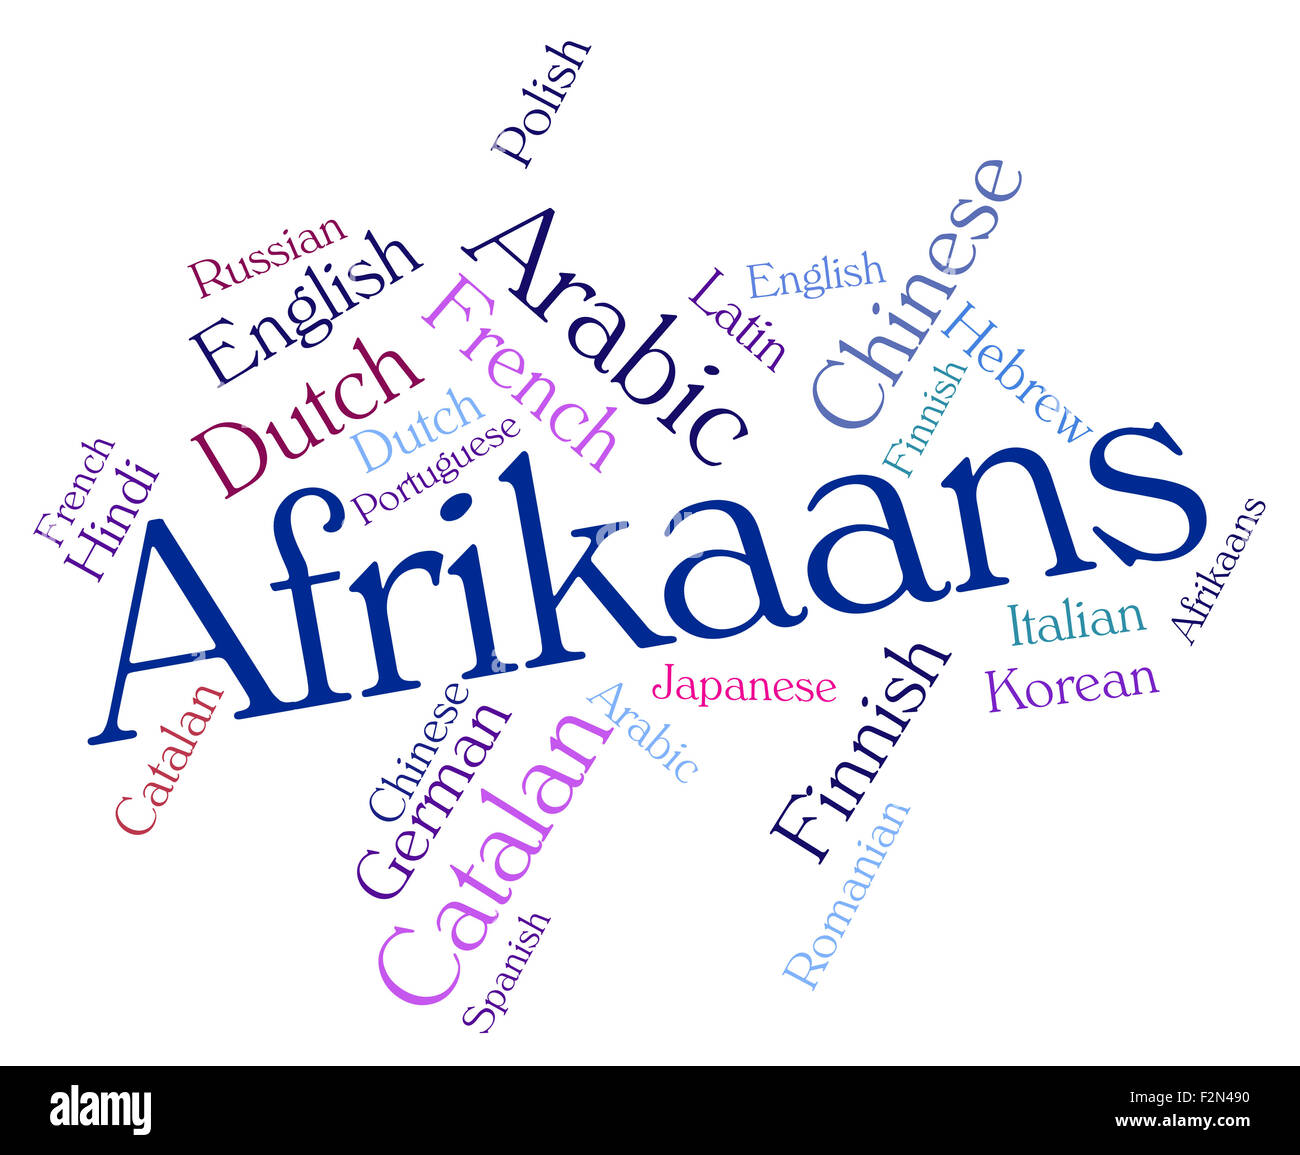 Afrikaans Language Representing Words Word And Lingo Stock Photo